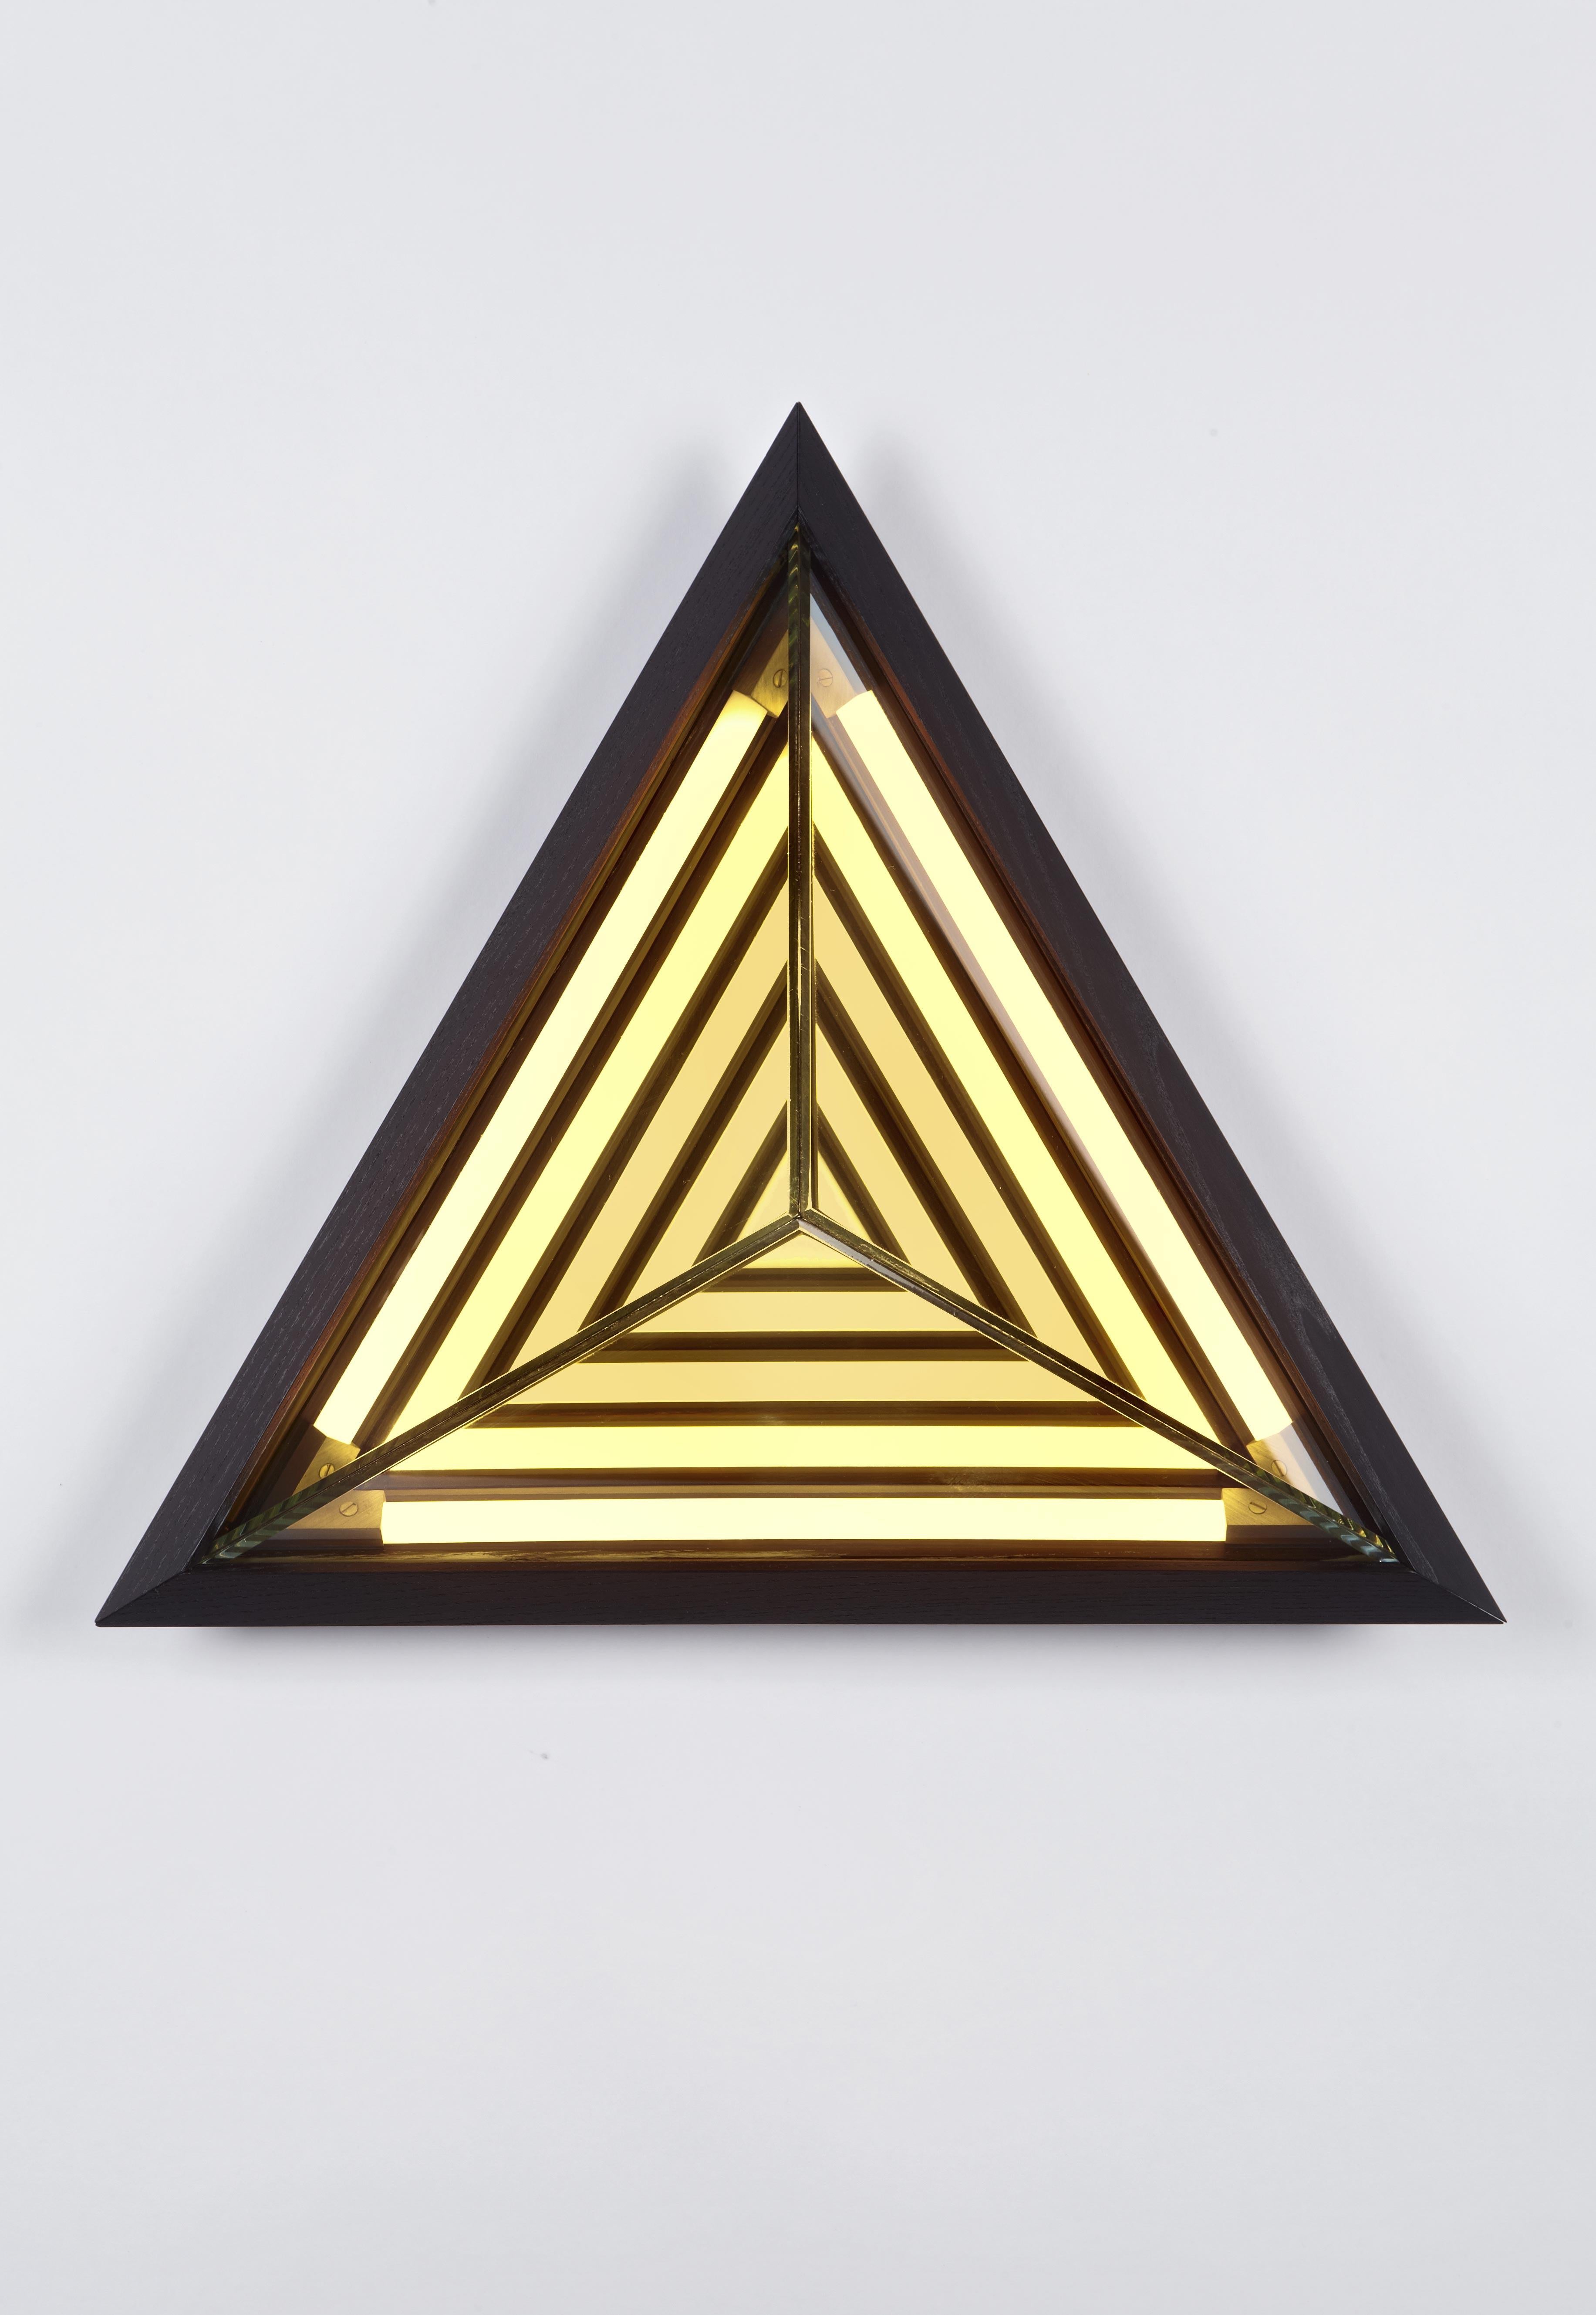 Inspired by his early work, this sconce is named after the painter Frank Stella. When illuminated, its half-mirrored glass diffuser reveals a series of nested geometric shapes. Stella creates the impression of infinite volume within a finite